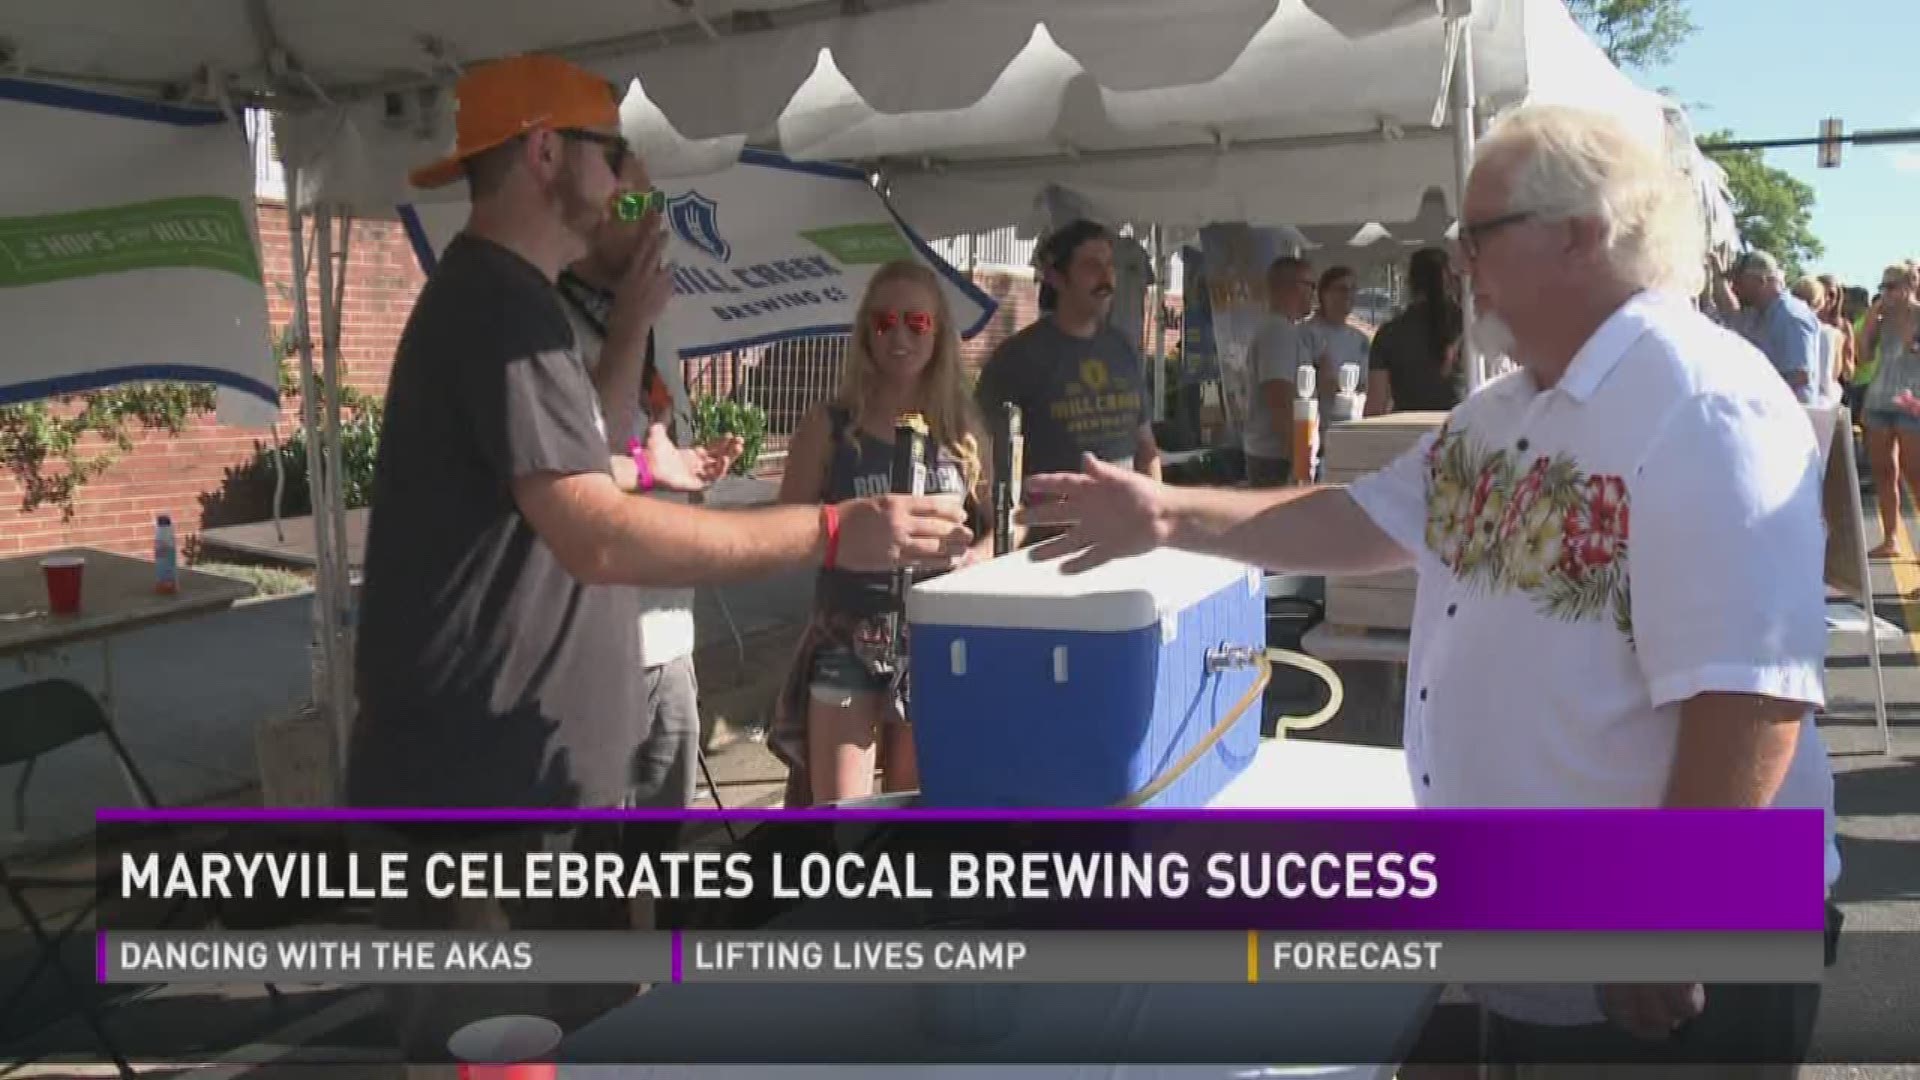 June 24, 2017: Hops, malts and brews filled Maryville as the city celebrated its third annual brewing festival.